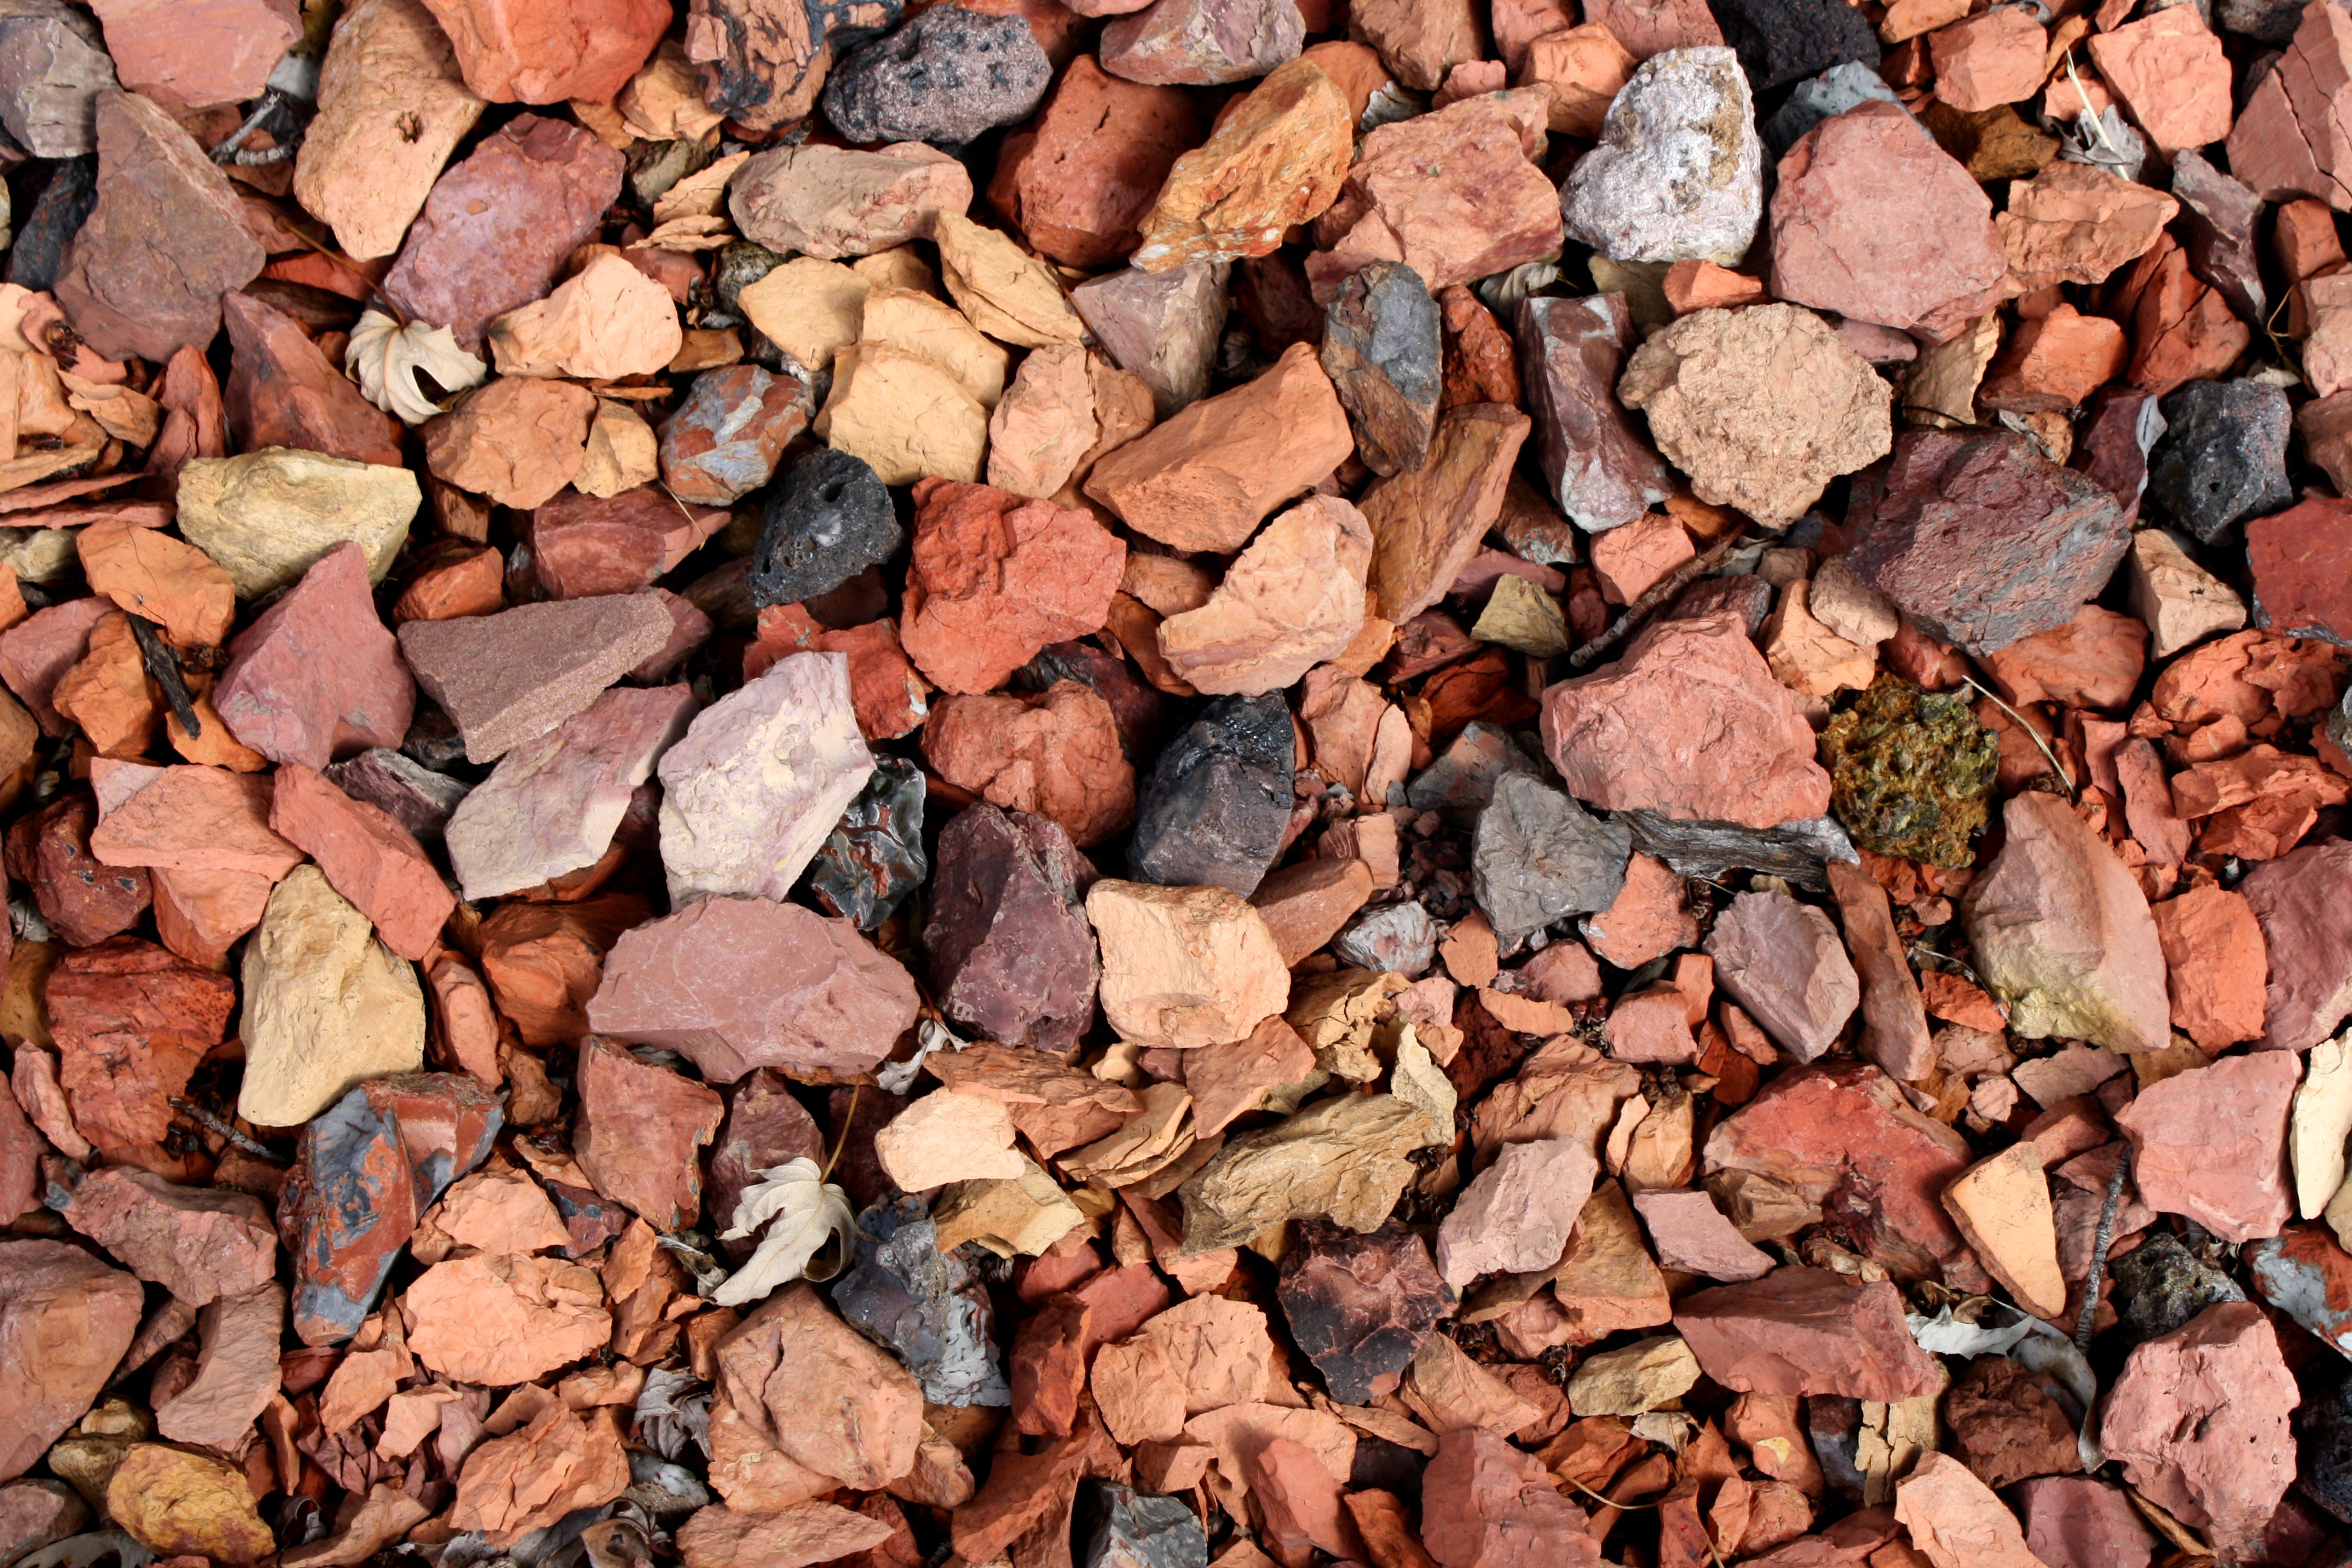 Red and Black Rocks Gravel Texture Picture | Free Photograph ...